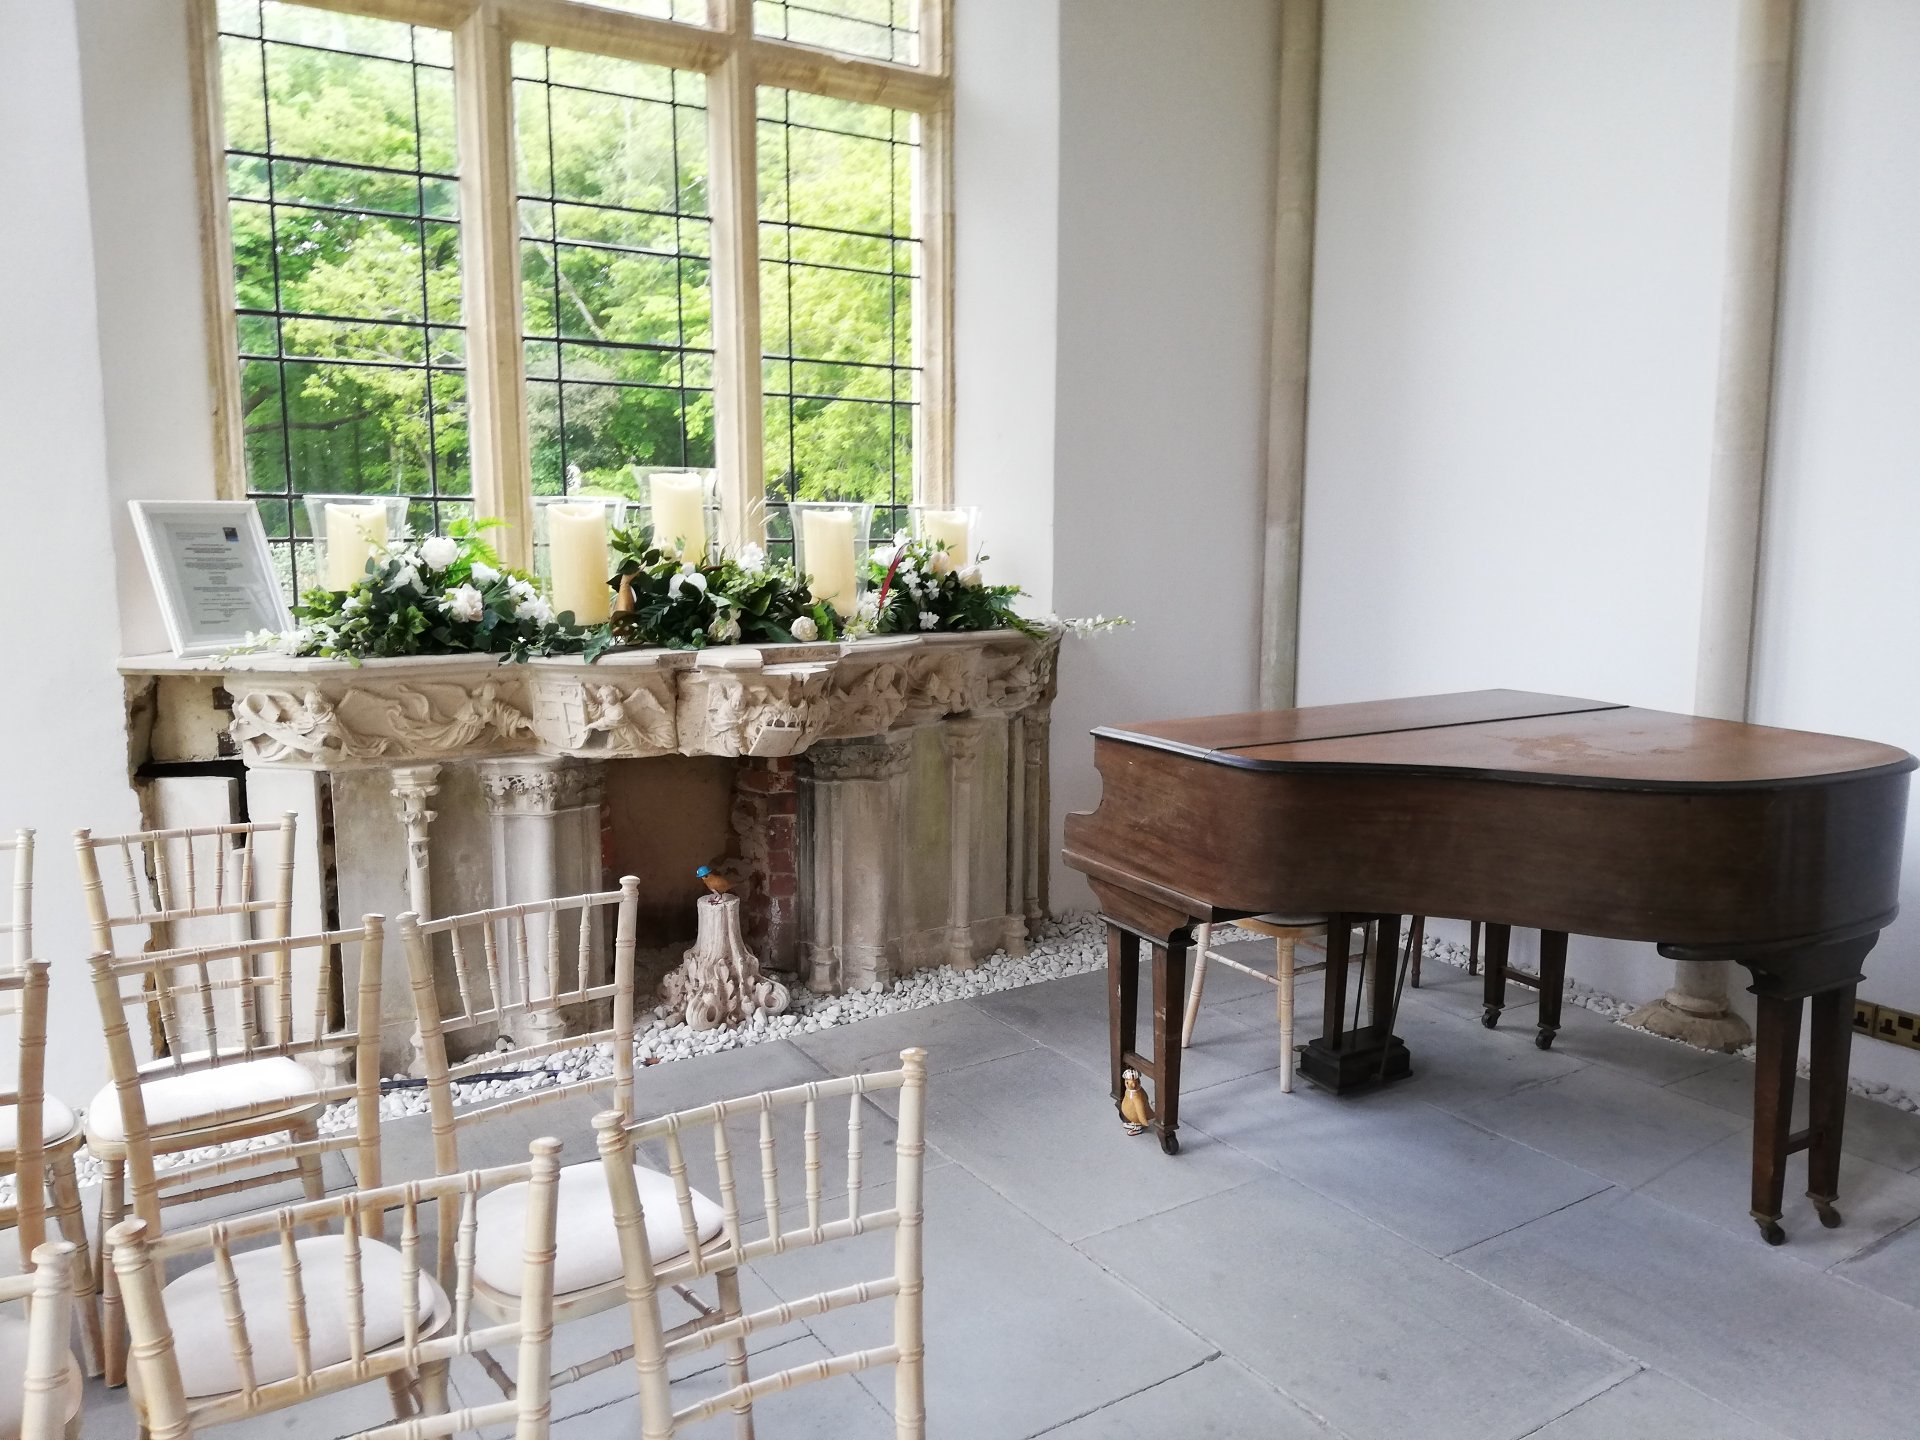 Spot the Duck - all three birds hiding around the piano in the Wintergarden at Highcliffe Castle. There is a big bright window above a stone fireplace.